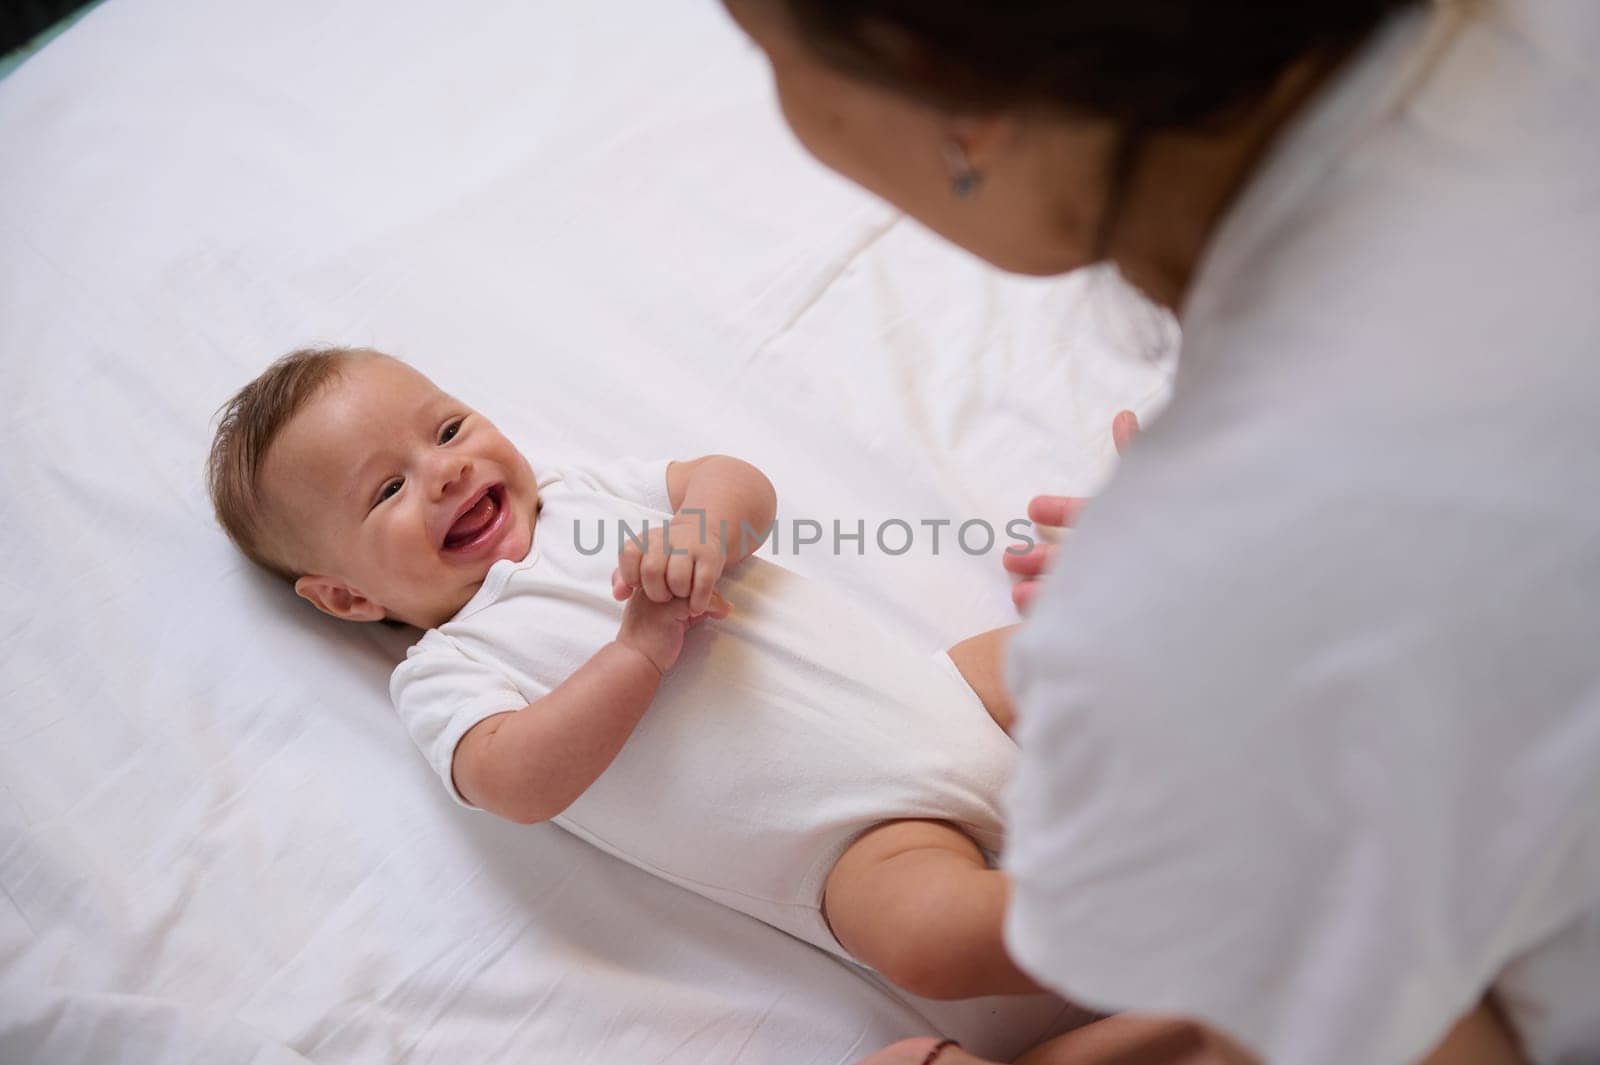 Playful baby boy 4 month old holding hands together, laughing, smiling, catching emotions of his loving caring mother by artgf